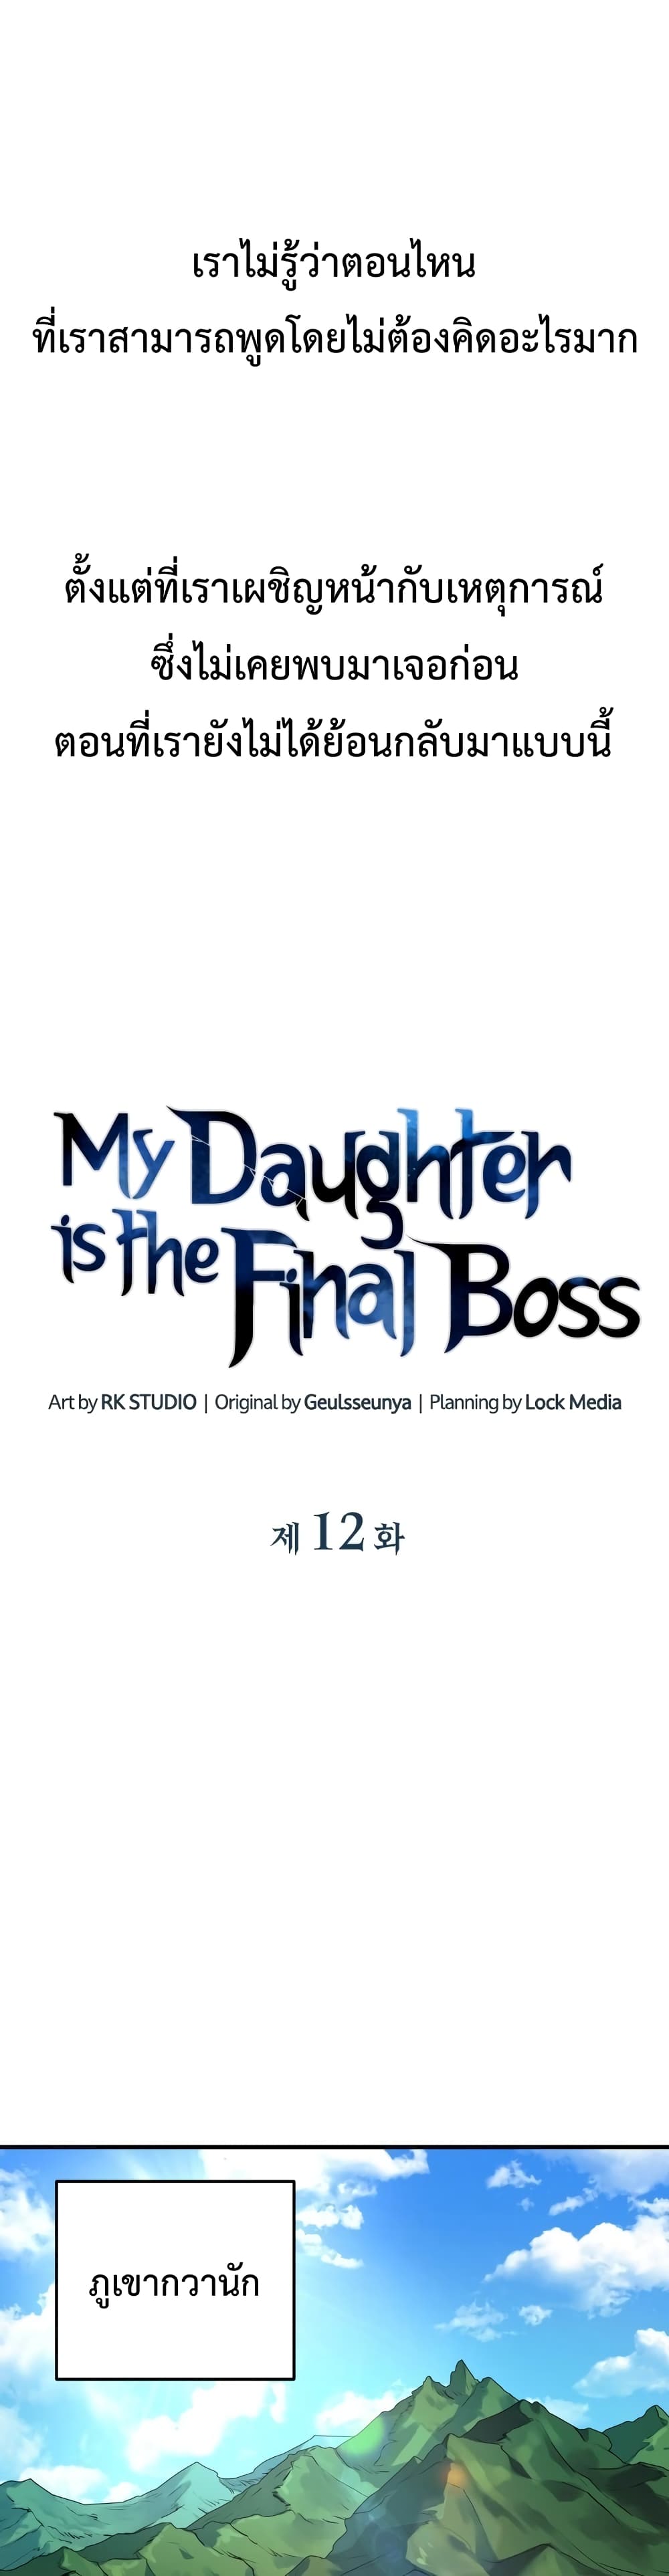 My Daughter is the Final Boss 12 13